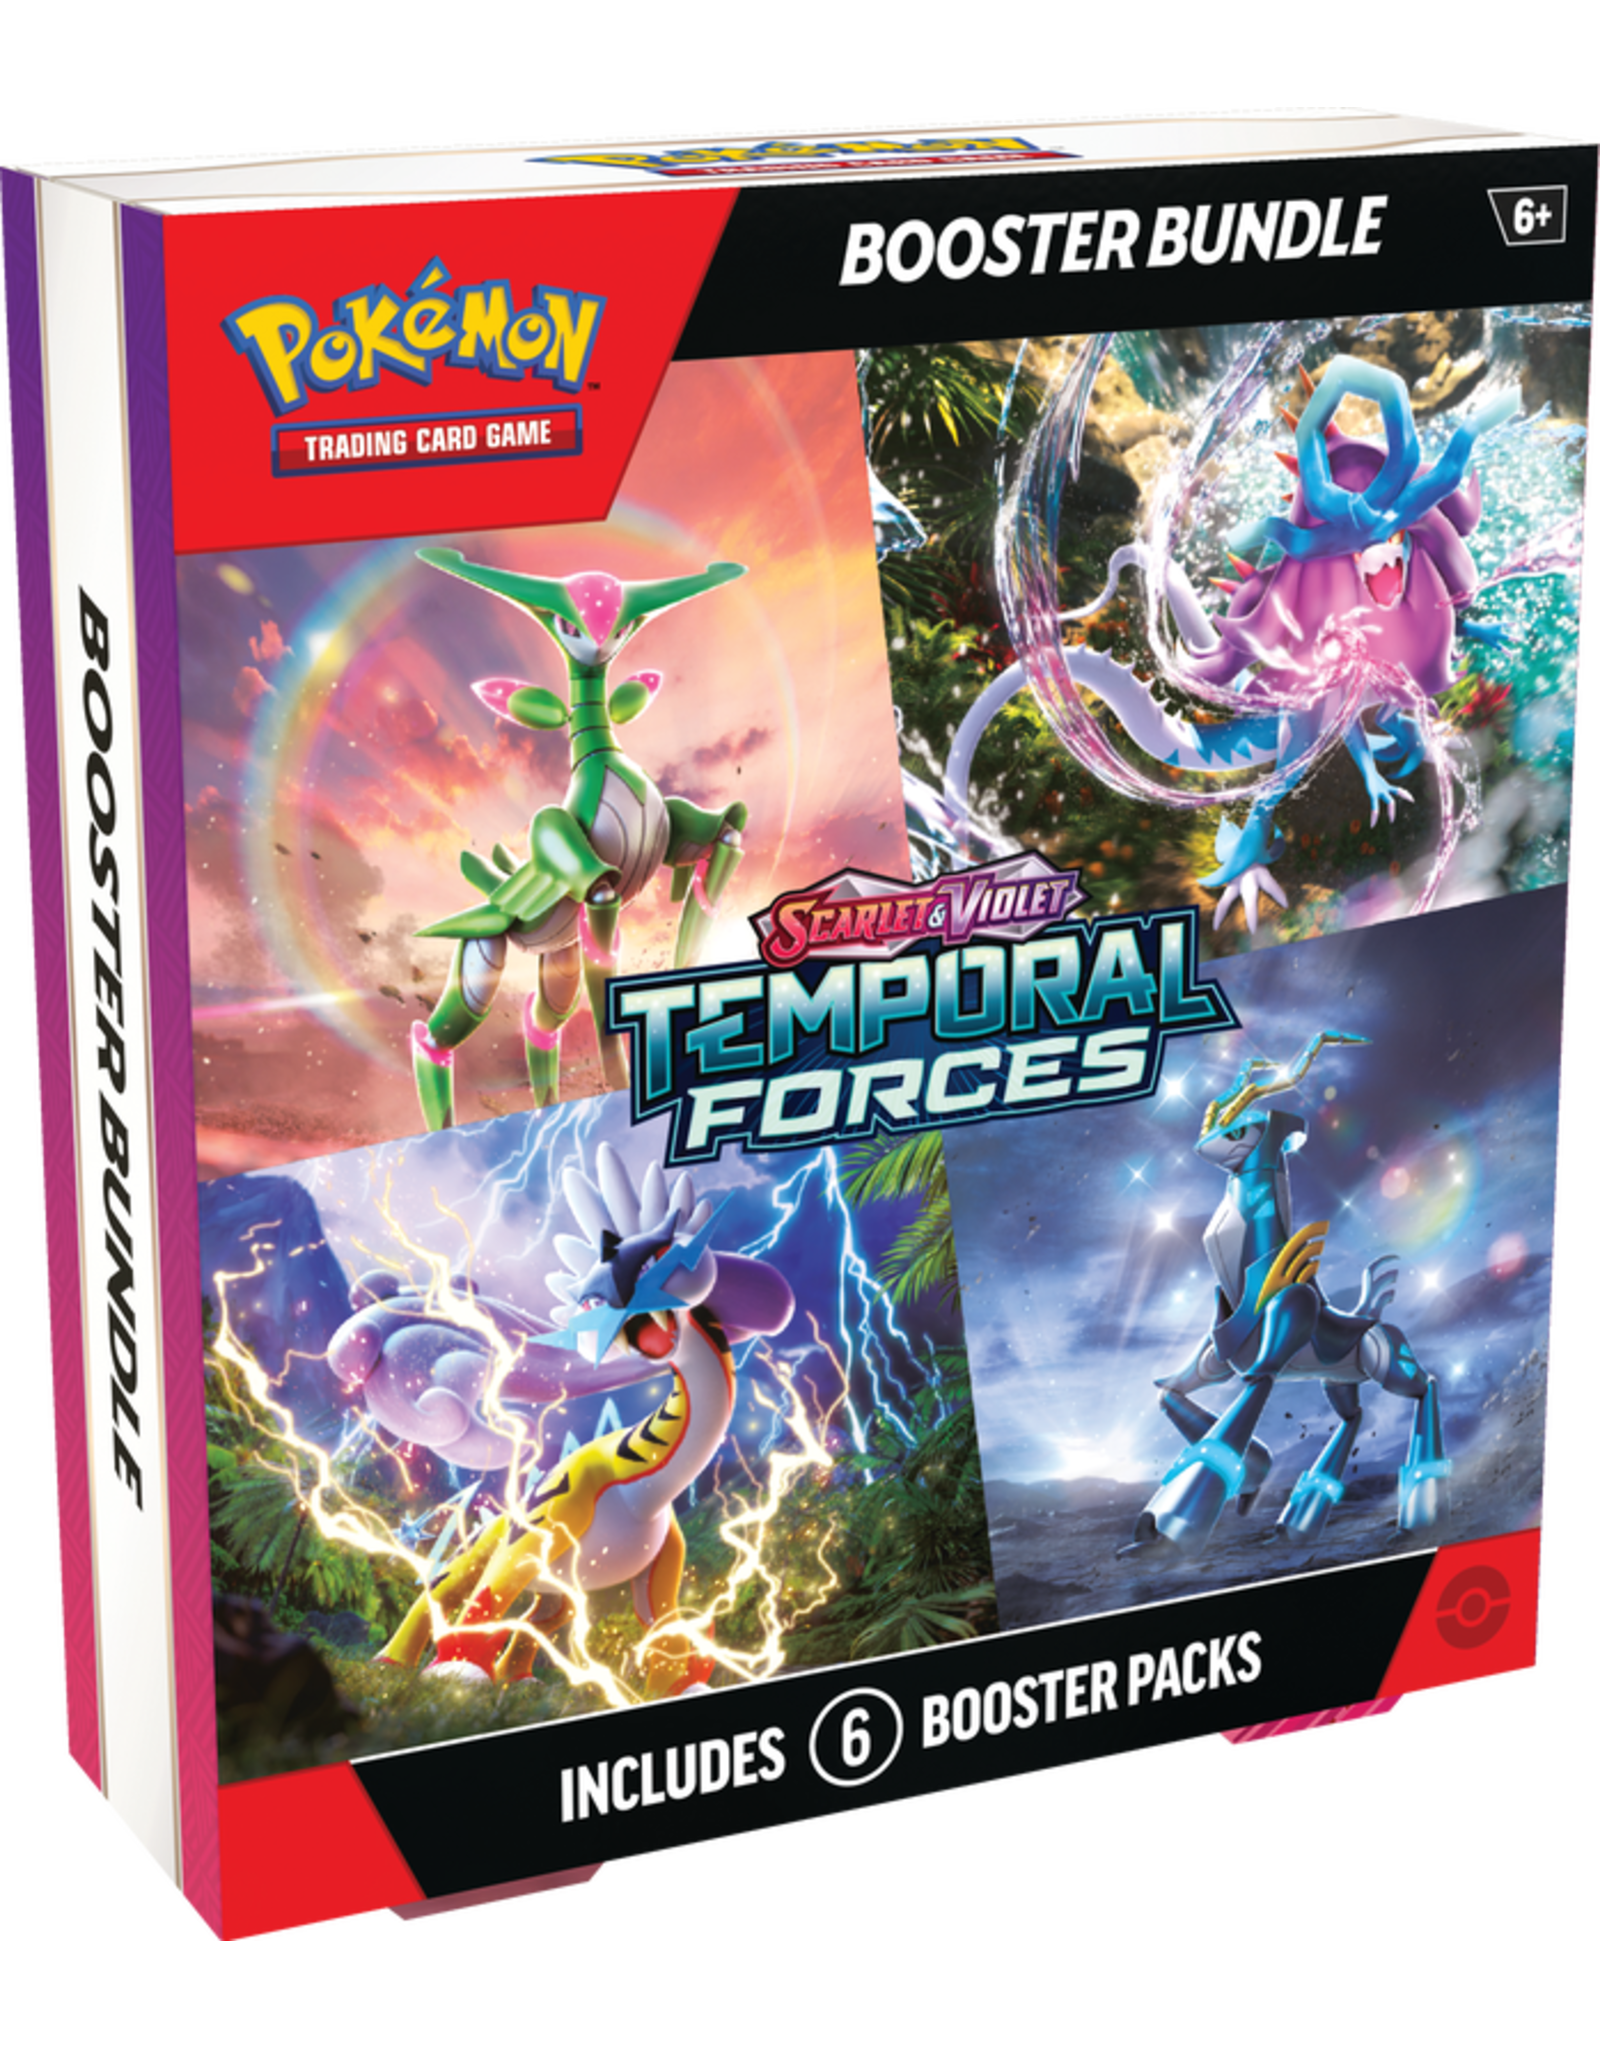 The Pokemon Company Pokémon Trading Card Game - Temporal Force Booster Bundle